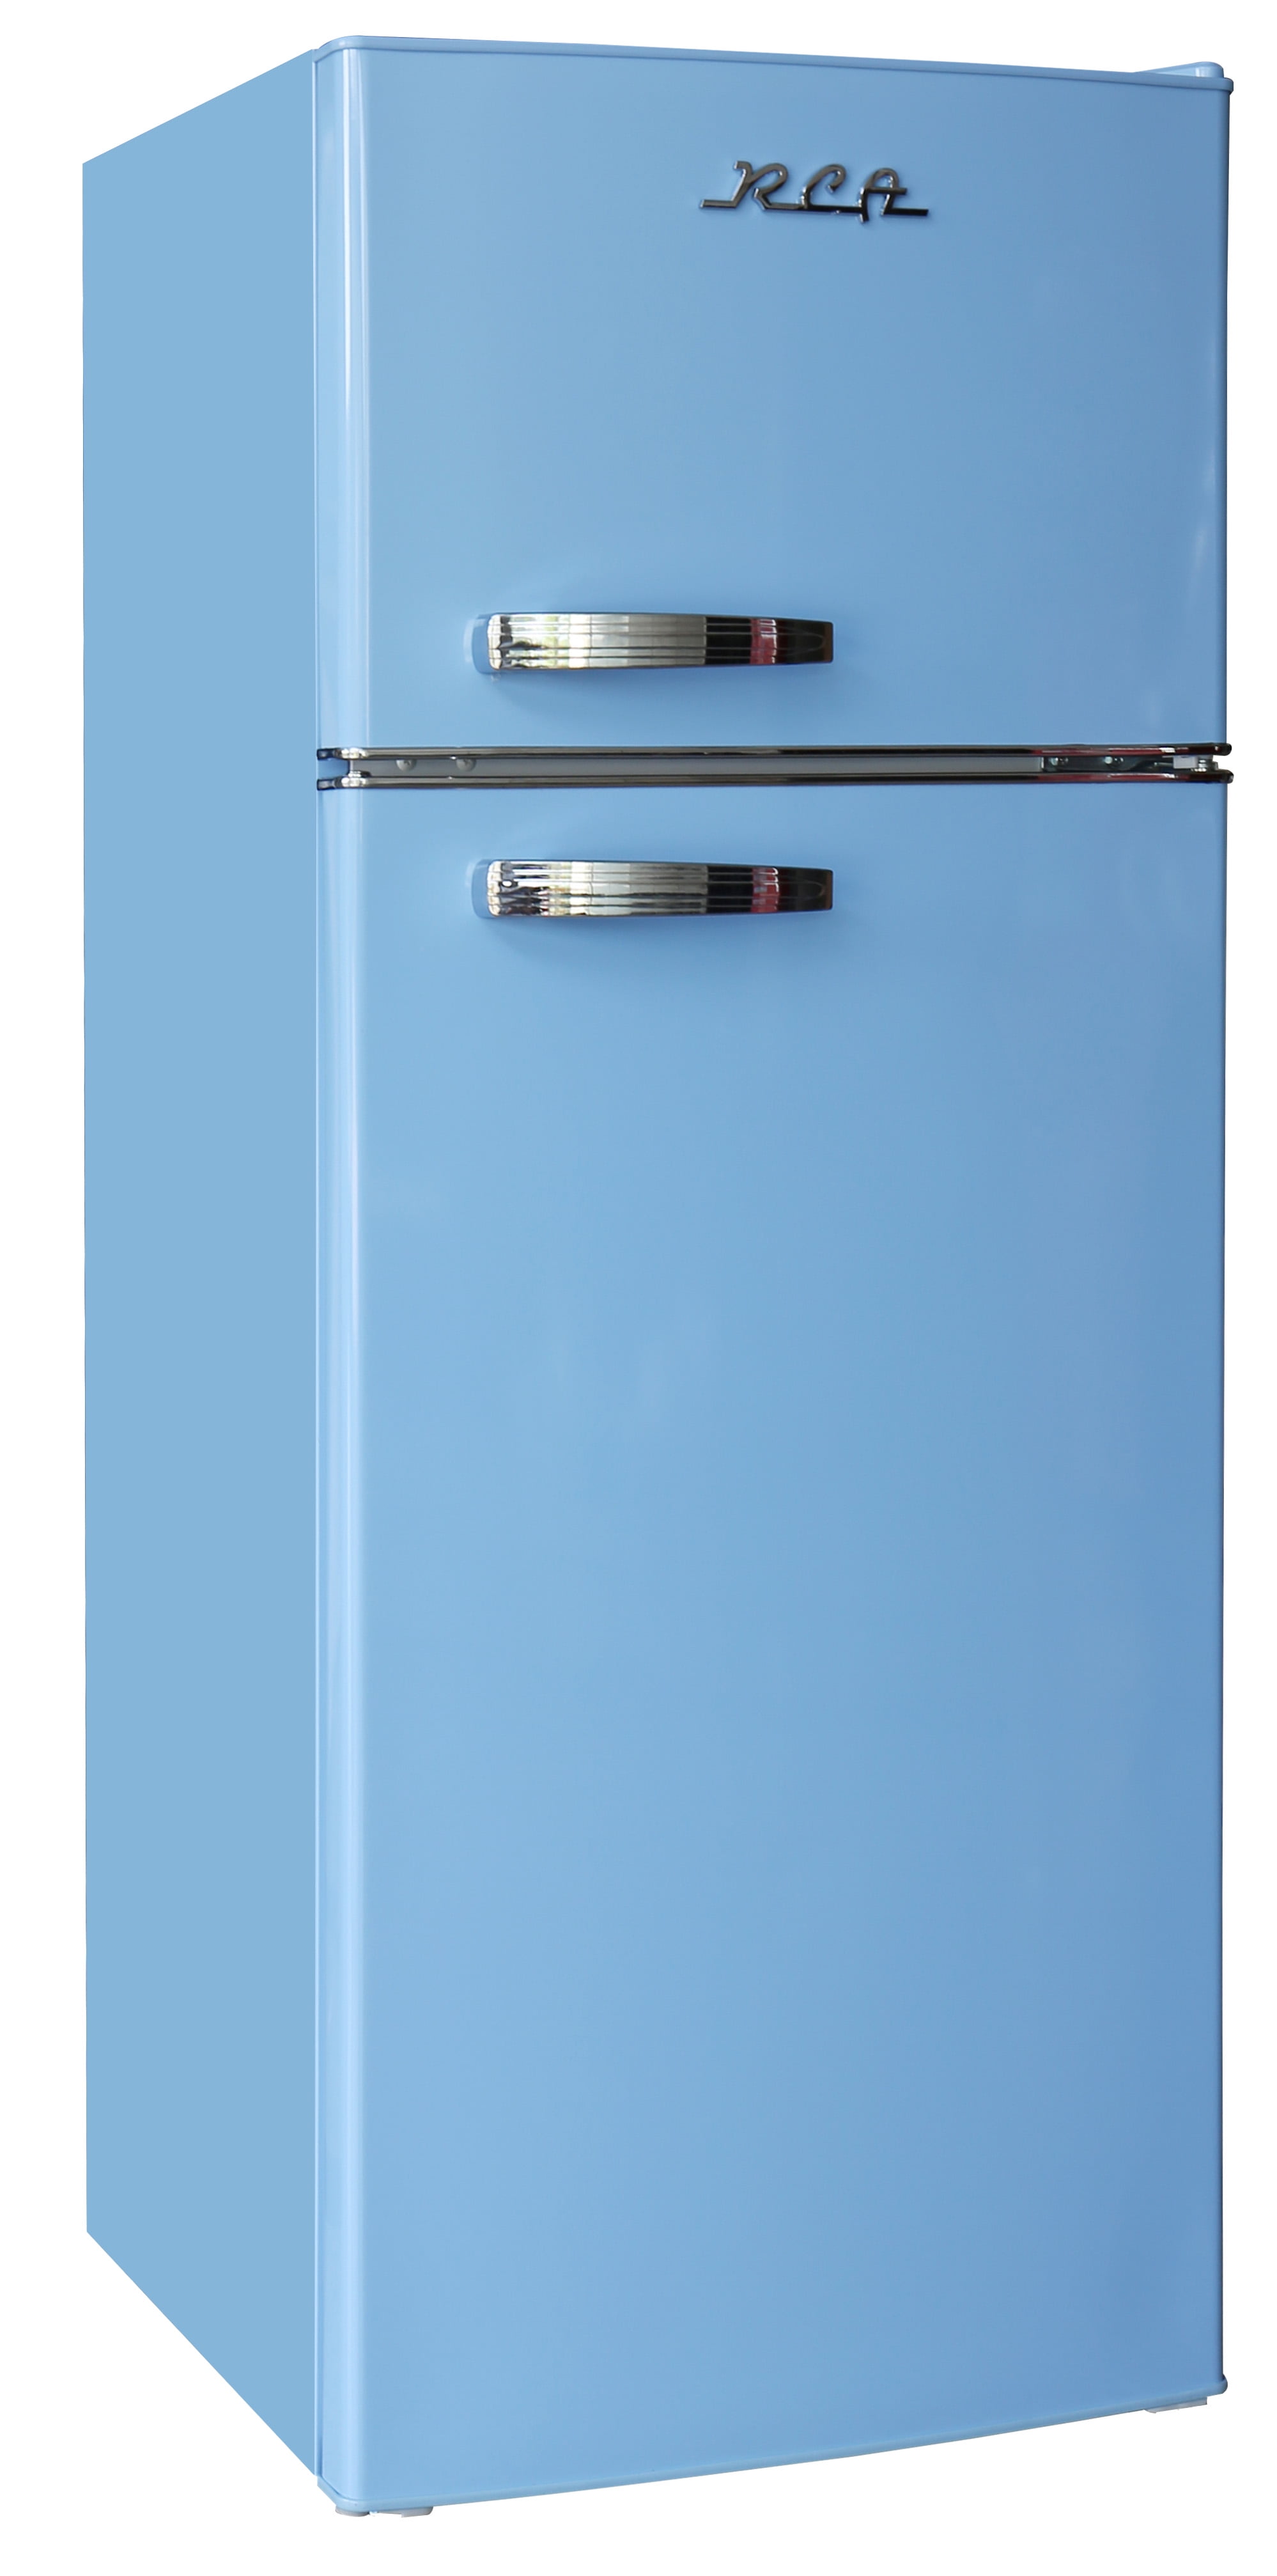 RCA RFR115-BLUE 1.6 Cubic Foot Mini Fridge, Blue,  price tracker /  tracking,  price history charts,  price watches,  price  drop alerts